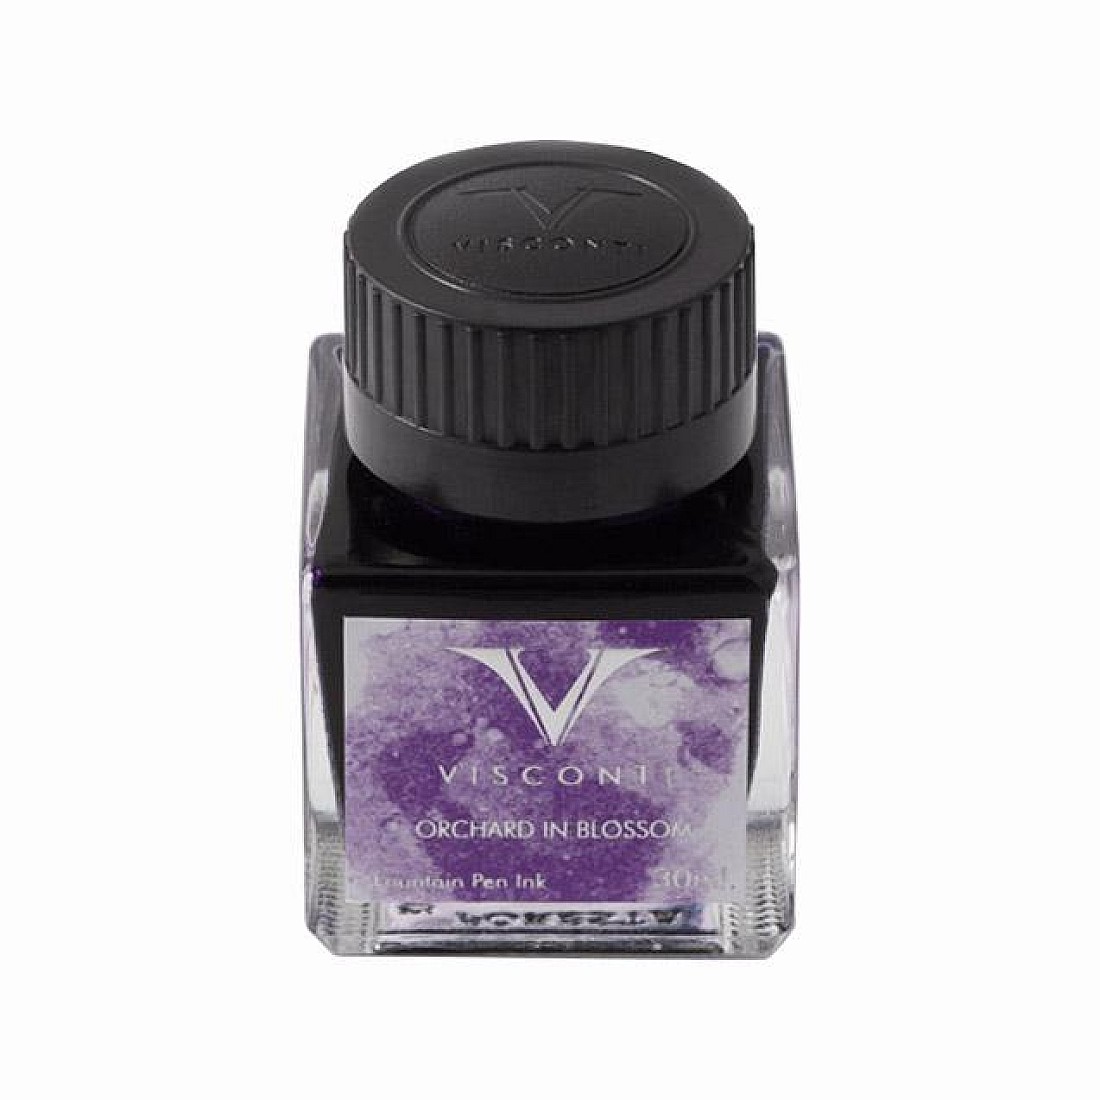 Visconti Van Gogh Orchard in Blossom - Ink Bottle